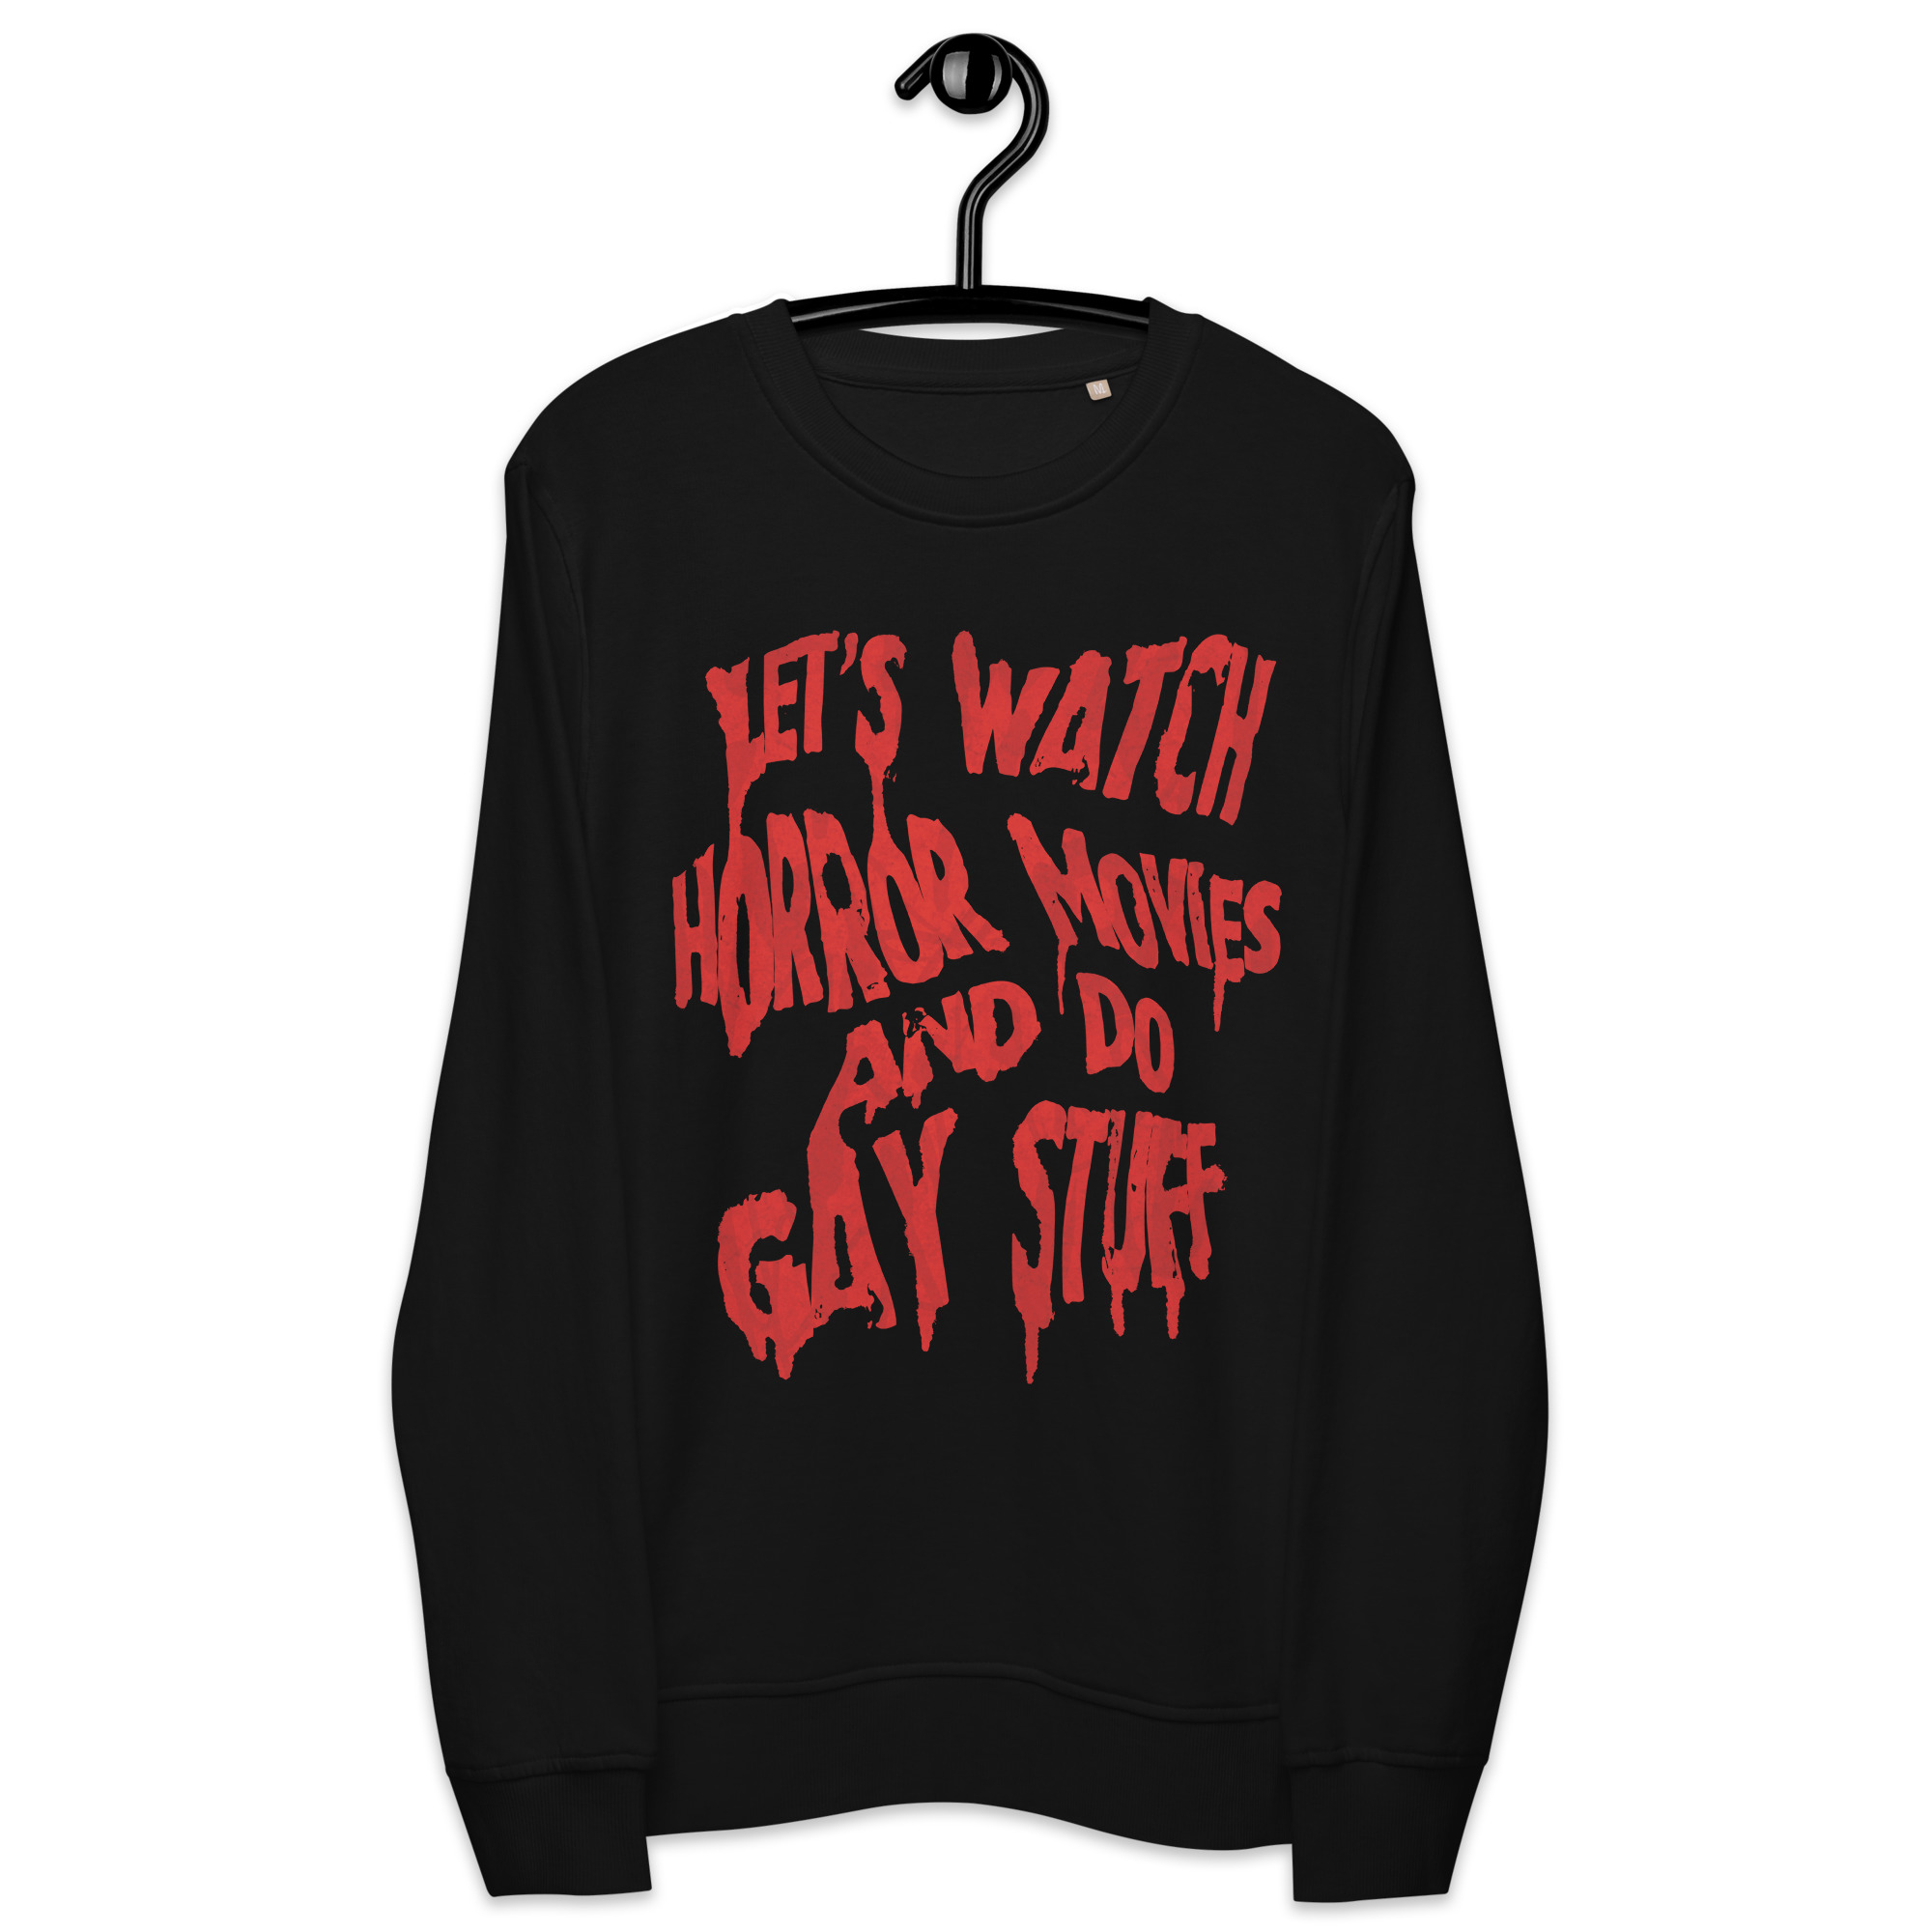 Featured image for “Let’s watch horror movies and do gay stuff - Unisex Organic Sweatshirt | SOL'S 03574”